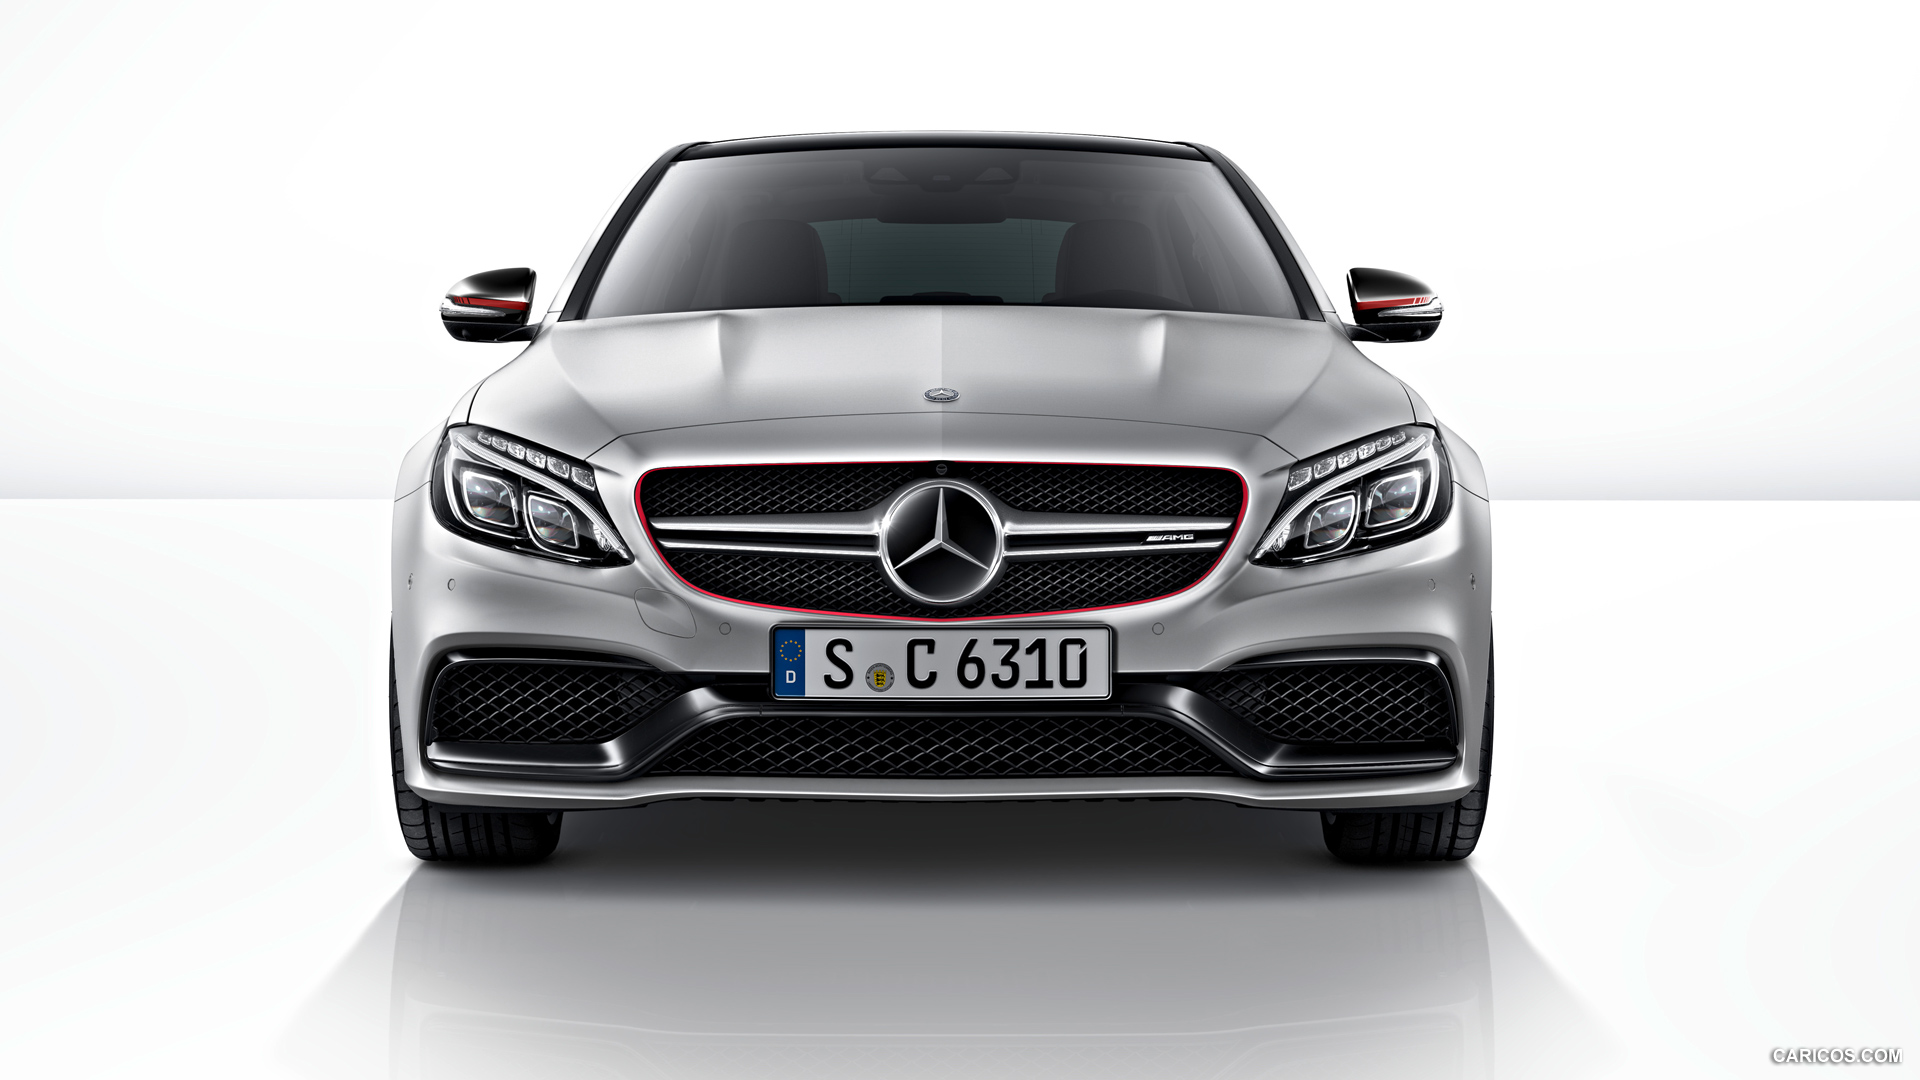  2015 Mercedes-Benz C63 AMG Edition 1 - Front, #4 of 13